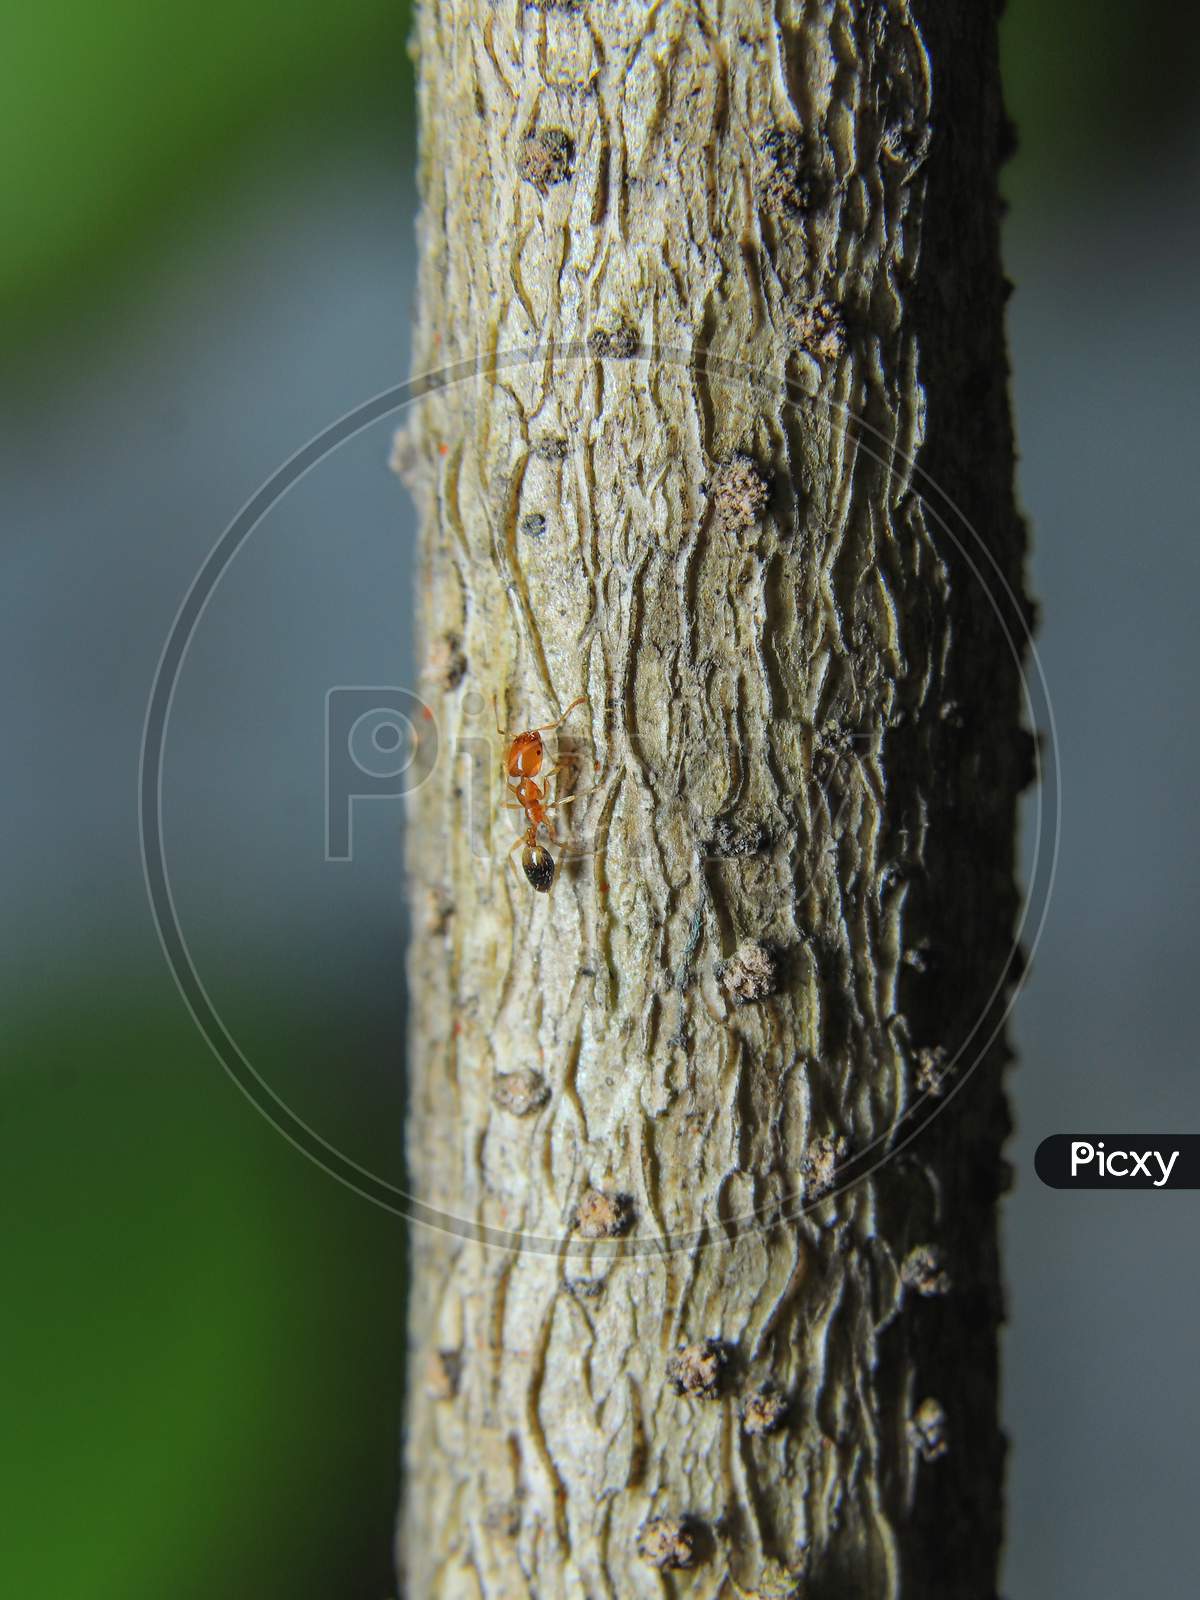 Small Red Ant Climbing On A Tree Macro Photography